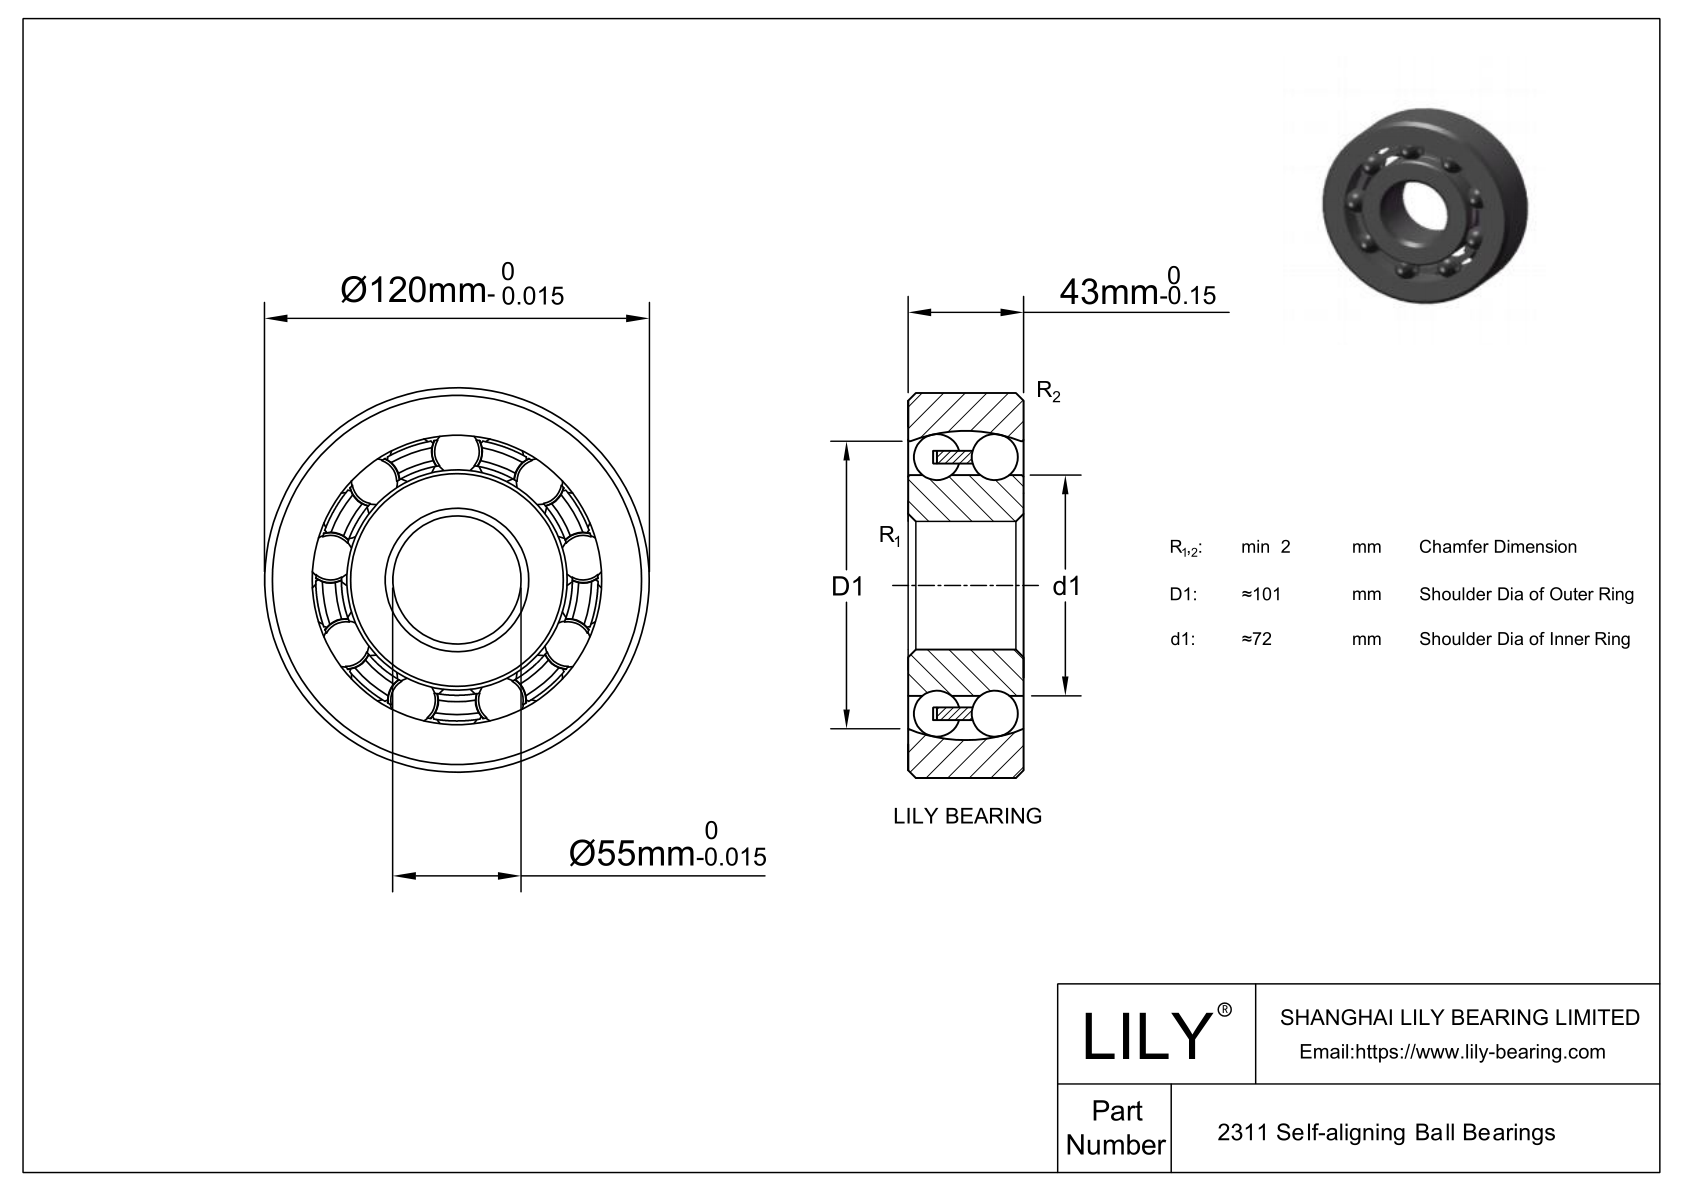 S2311 Stainless Steel Self Aligning Ball Bearings cad drawing